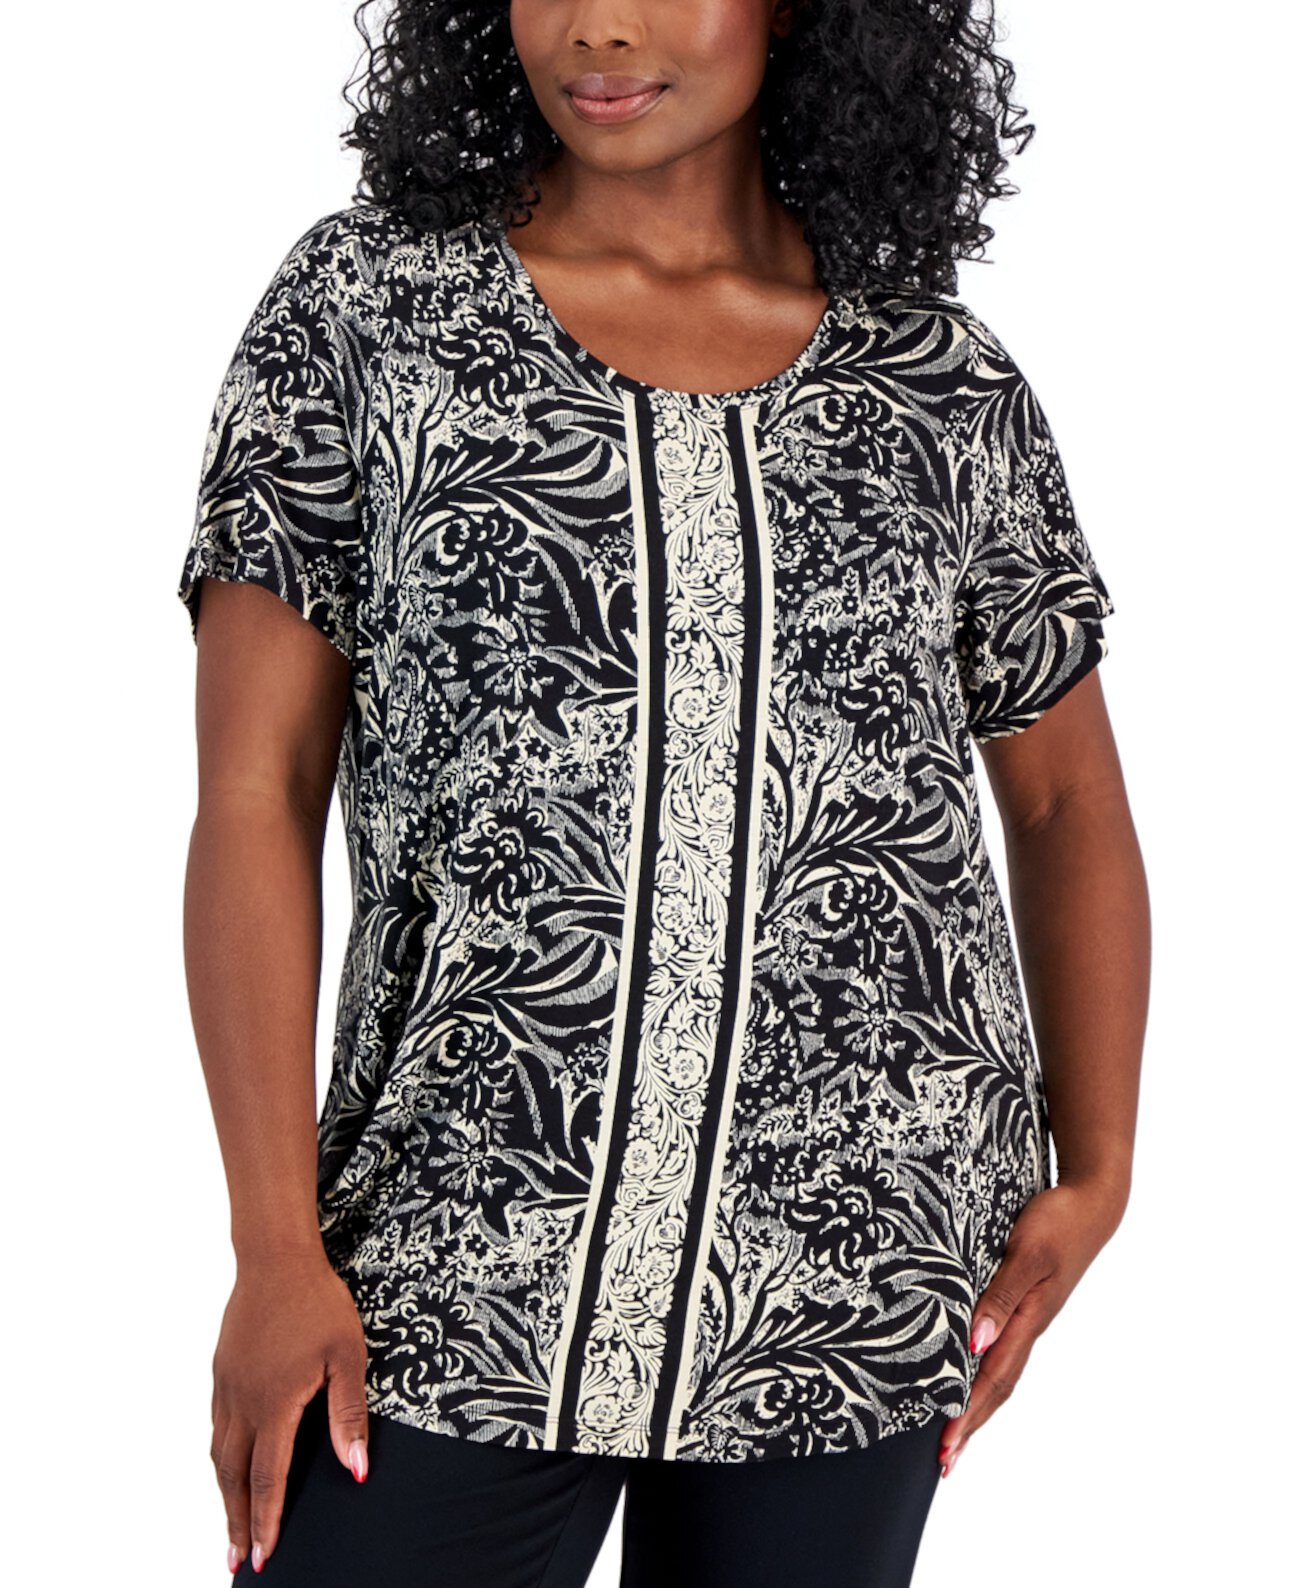 Plus Size Runway Print Short-Sleeve Top, Created for Macy's J&M Collection